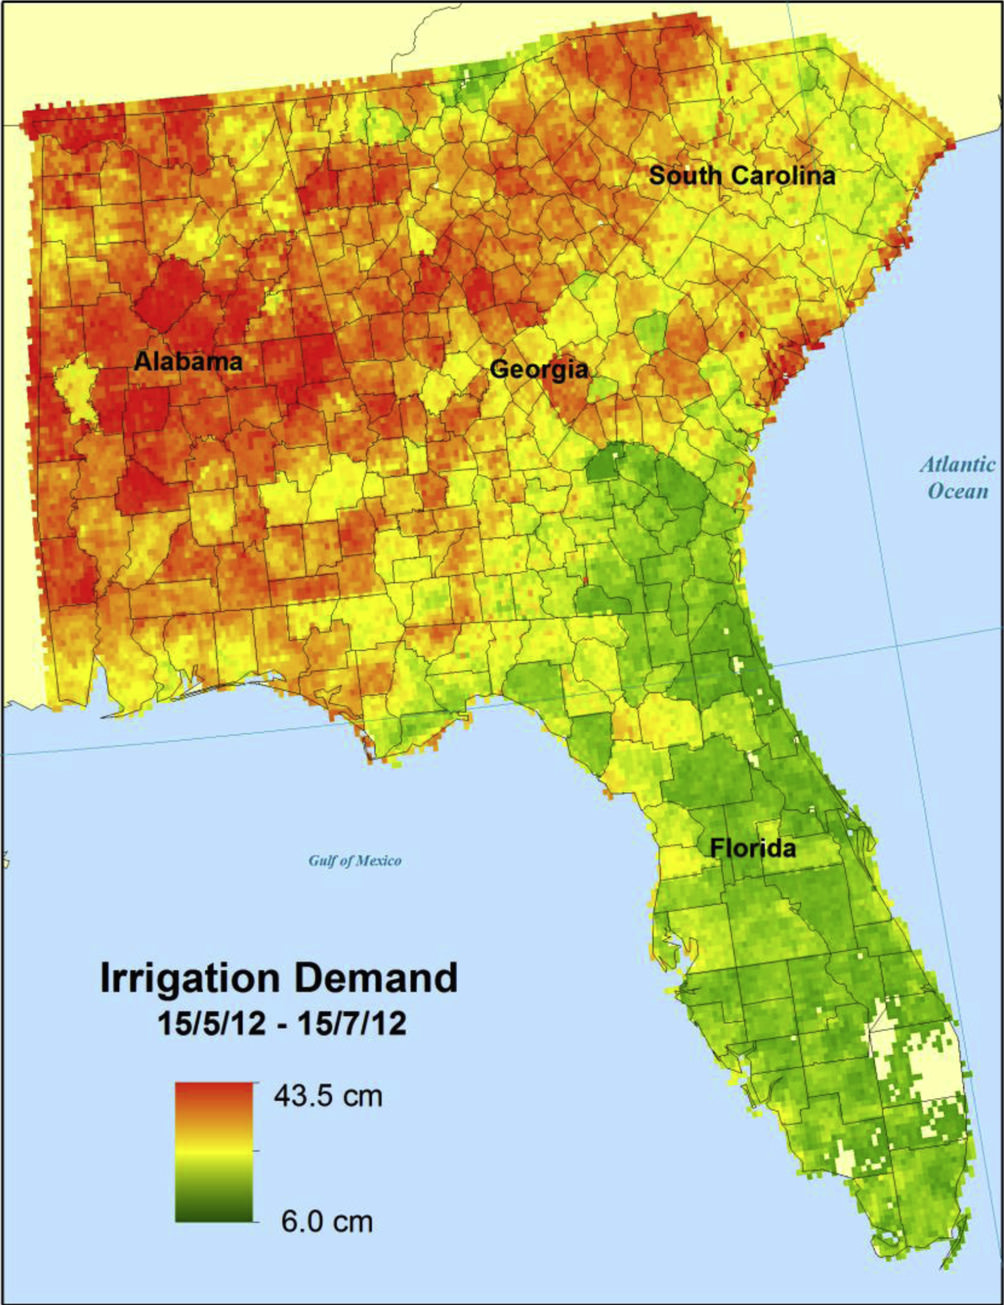 Irrigation demand visualized by NASA’s GriDSSAT during the flash drought of June 2012.